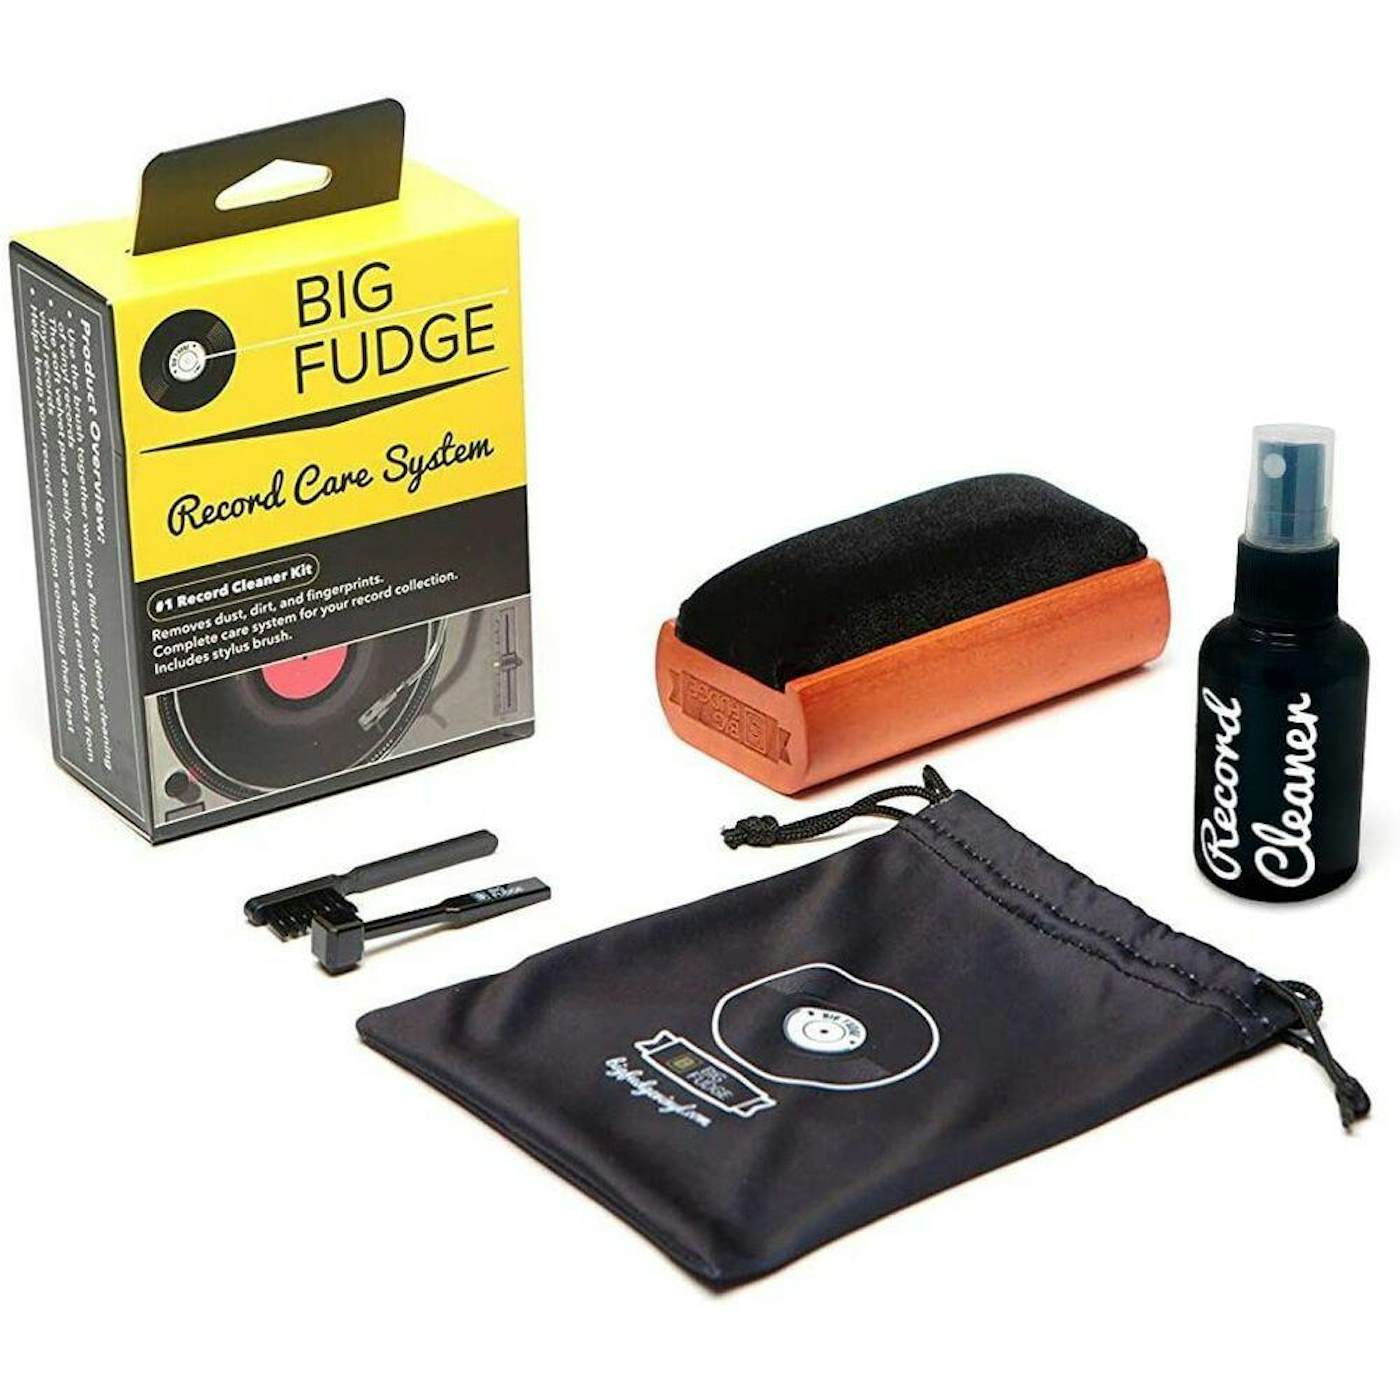 Vinyl accessories BIG FUDGE BFRC101US 4/1 RCRD CARE AND CLEANING KIT